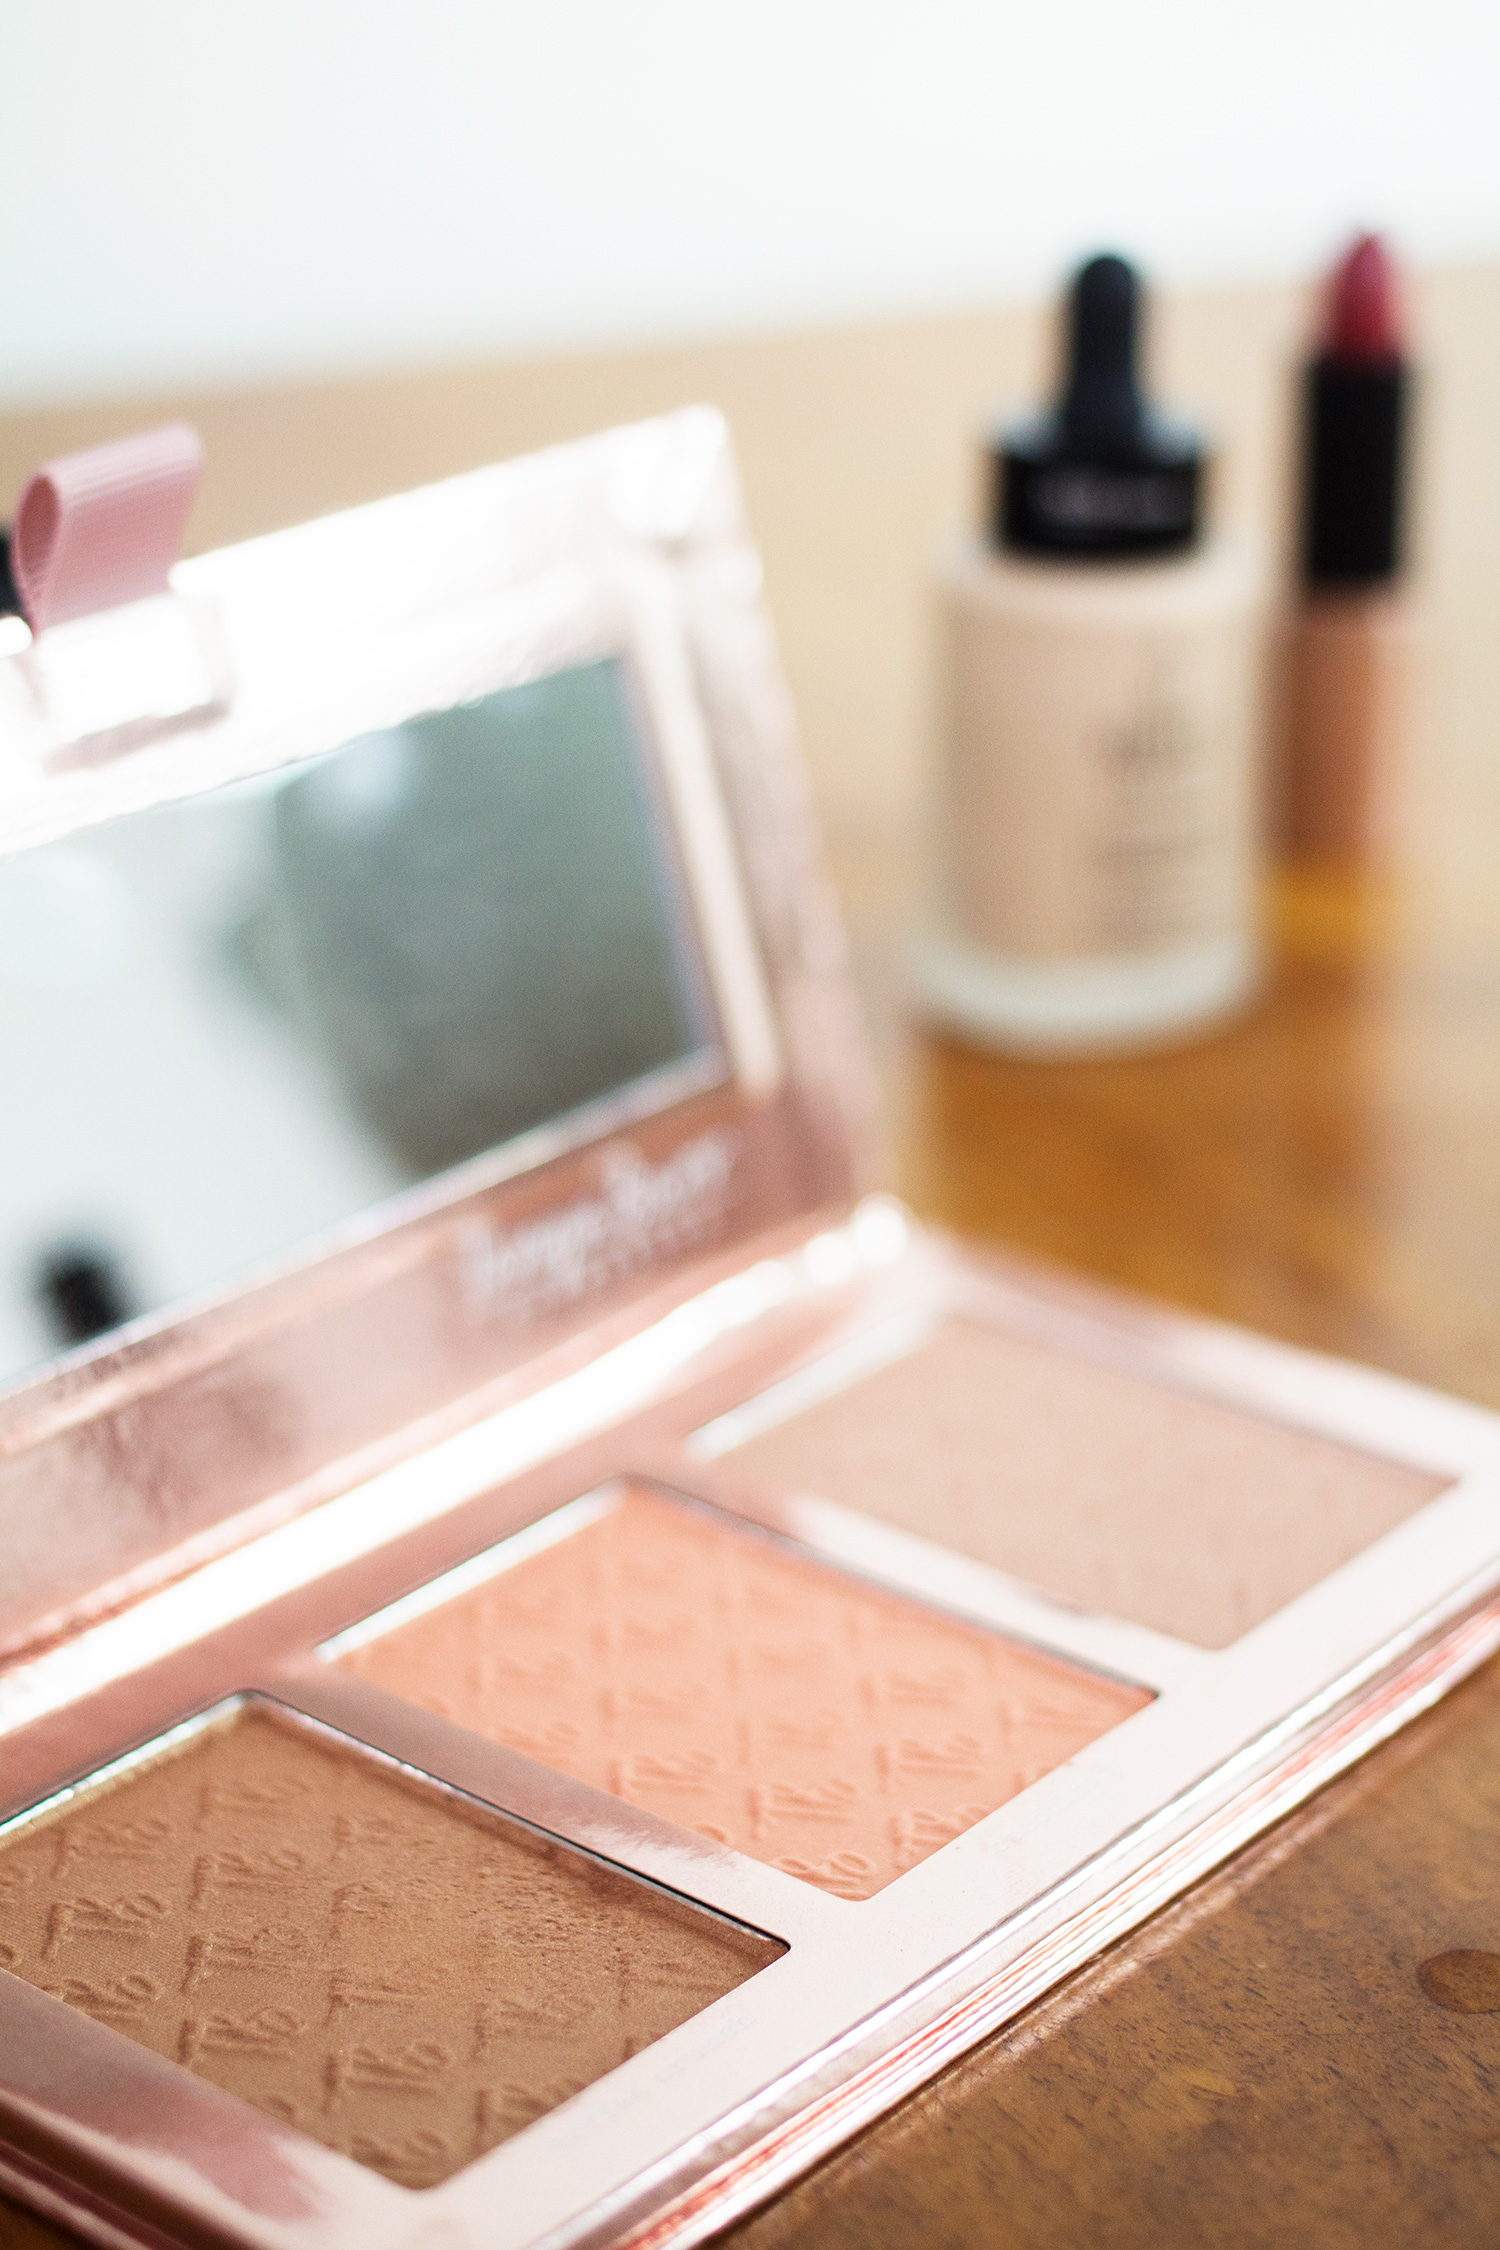 Tanya Burr Sweet Cheeks Palette.&nbsp;Photography by Alice Red.